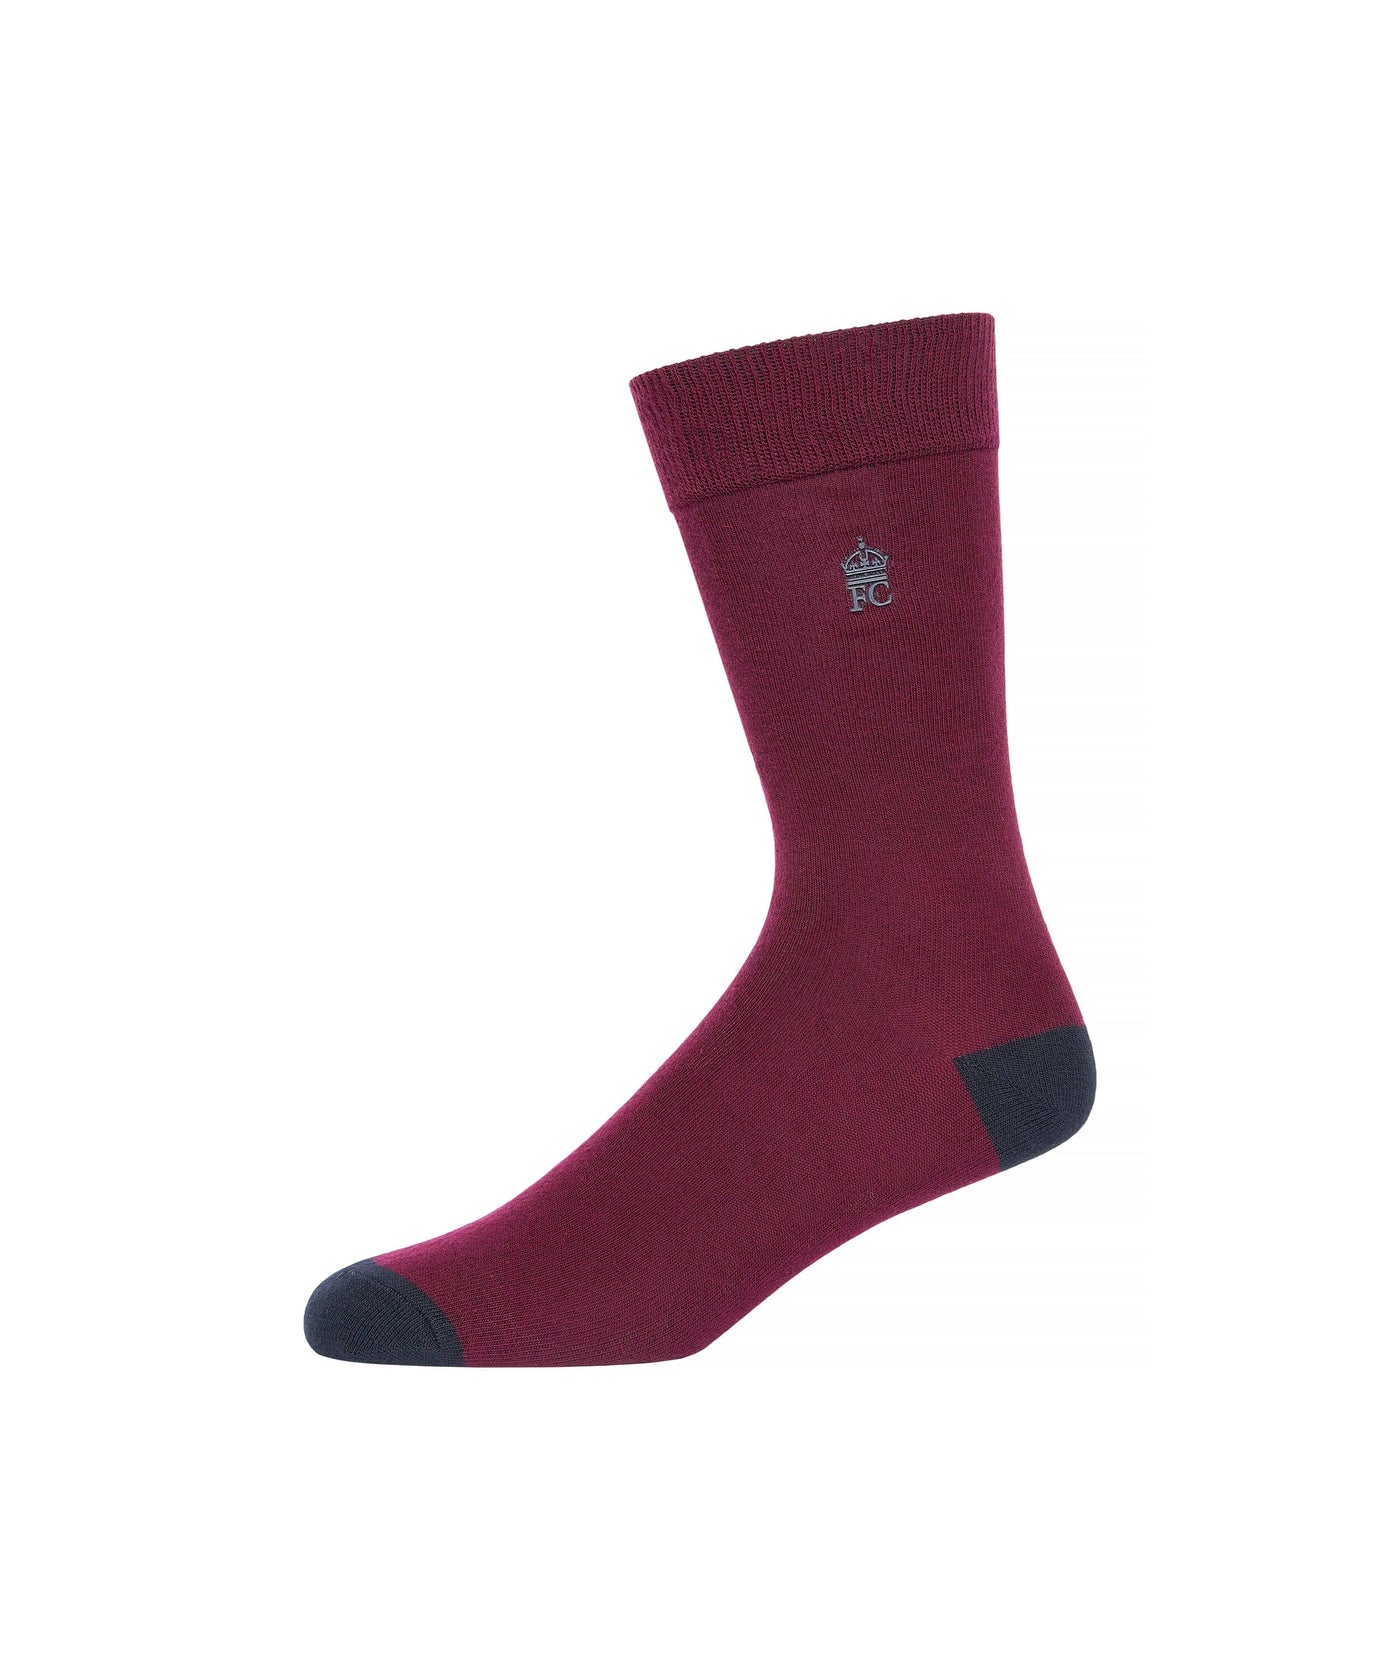 French Connection Dot Socks 3pk Marine/Chateaux